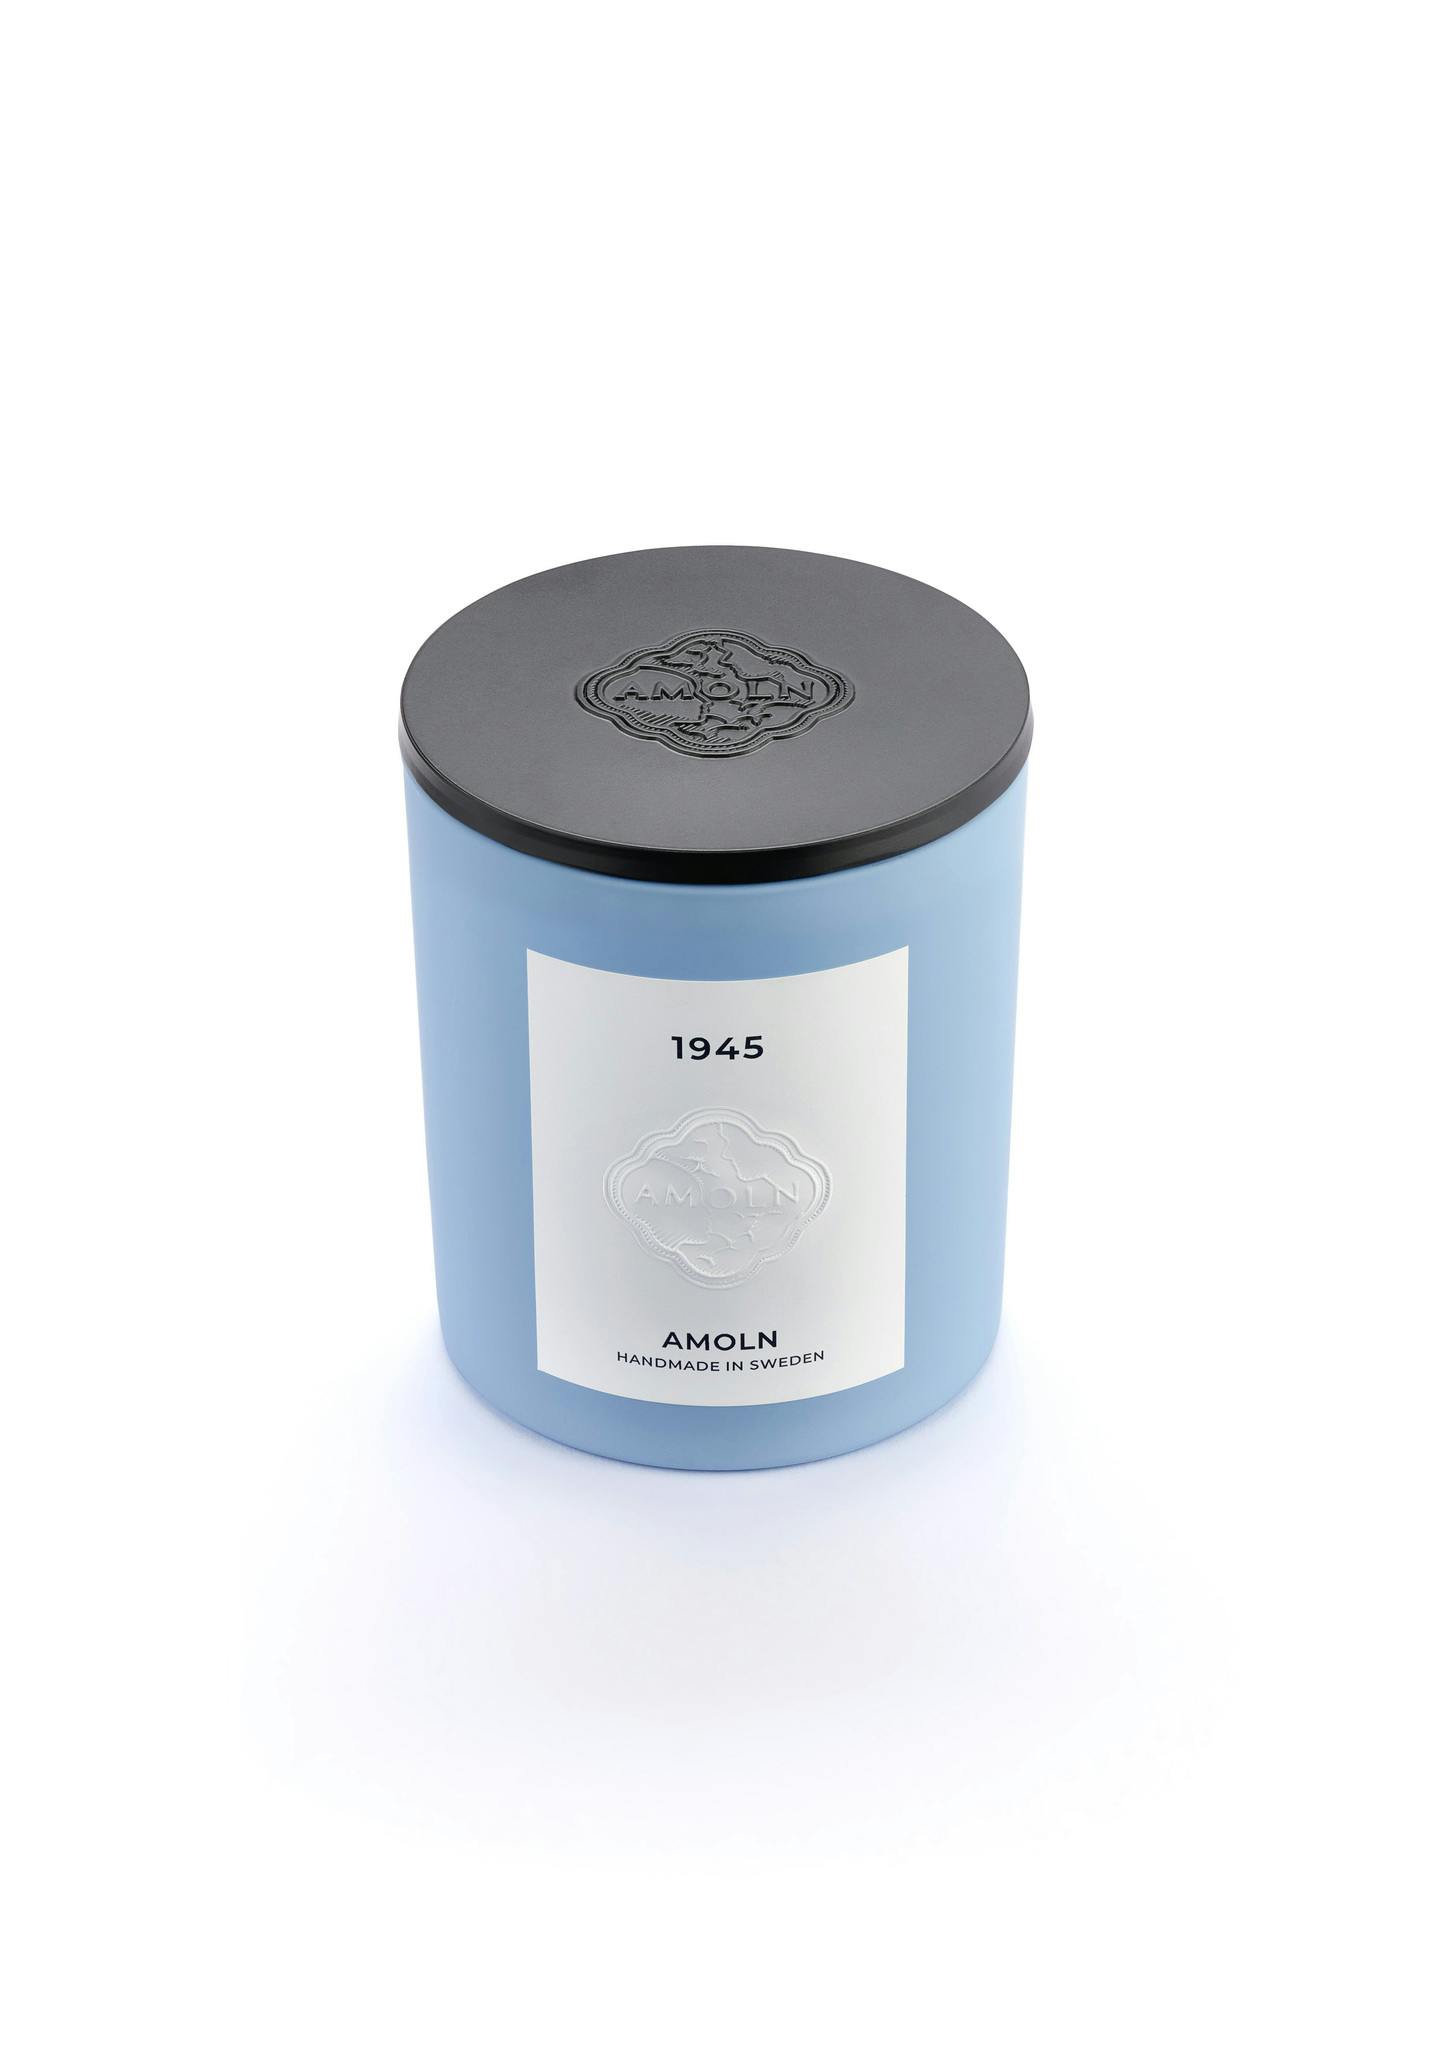 Light blue ceramic candle jar with a vegan, scented candle in blue wax, with black metal lid. Handcrafted by artisans in Sweden. Sustainably & ethically made.